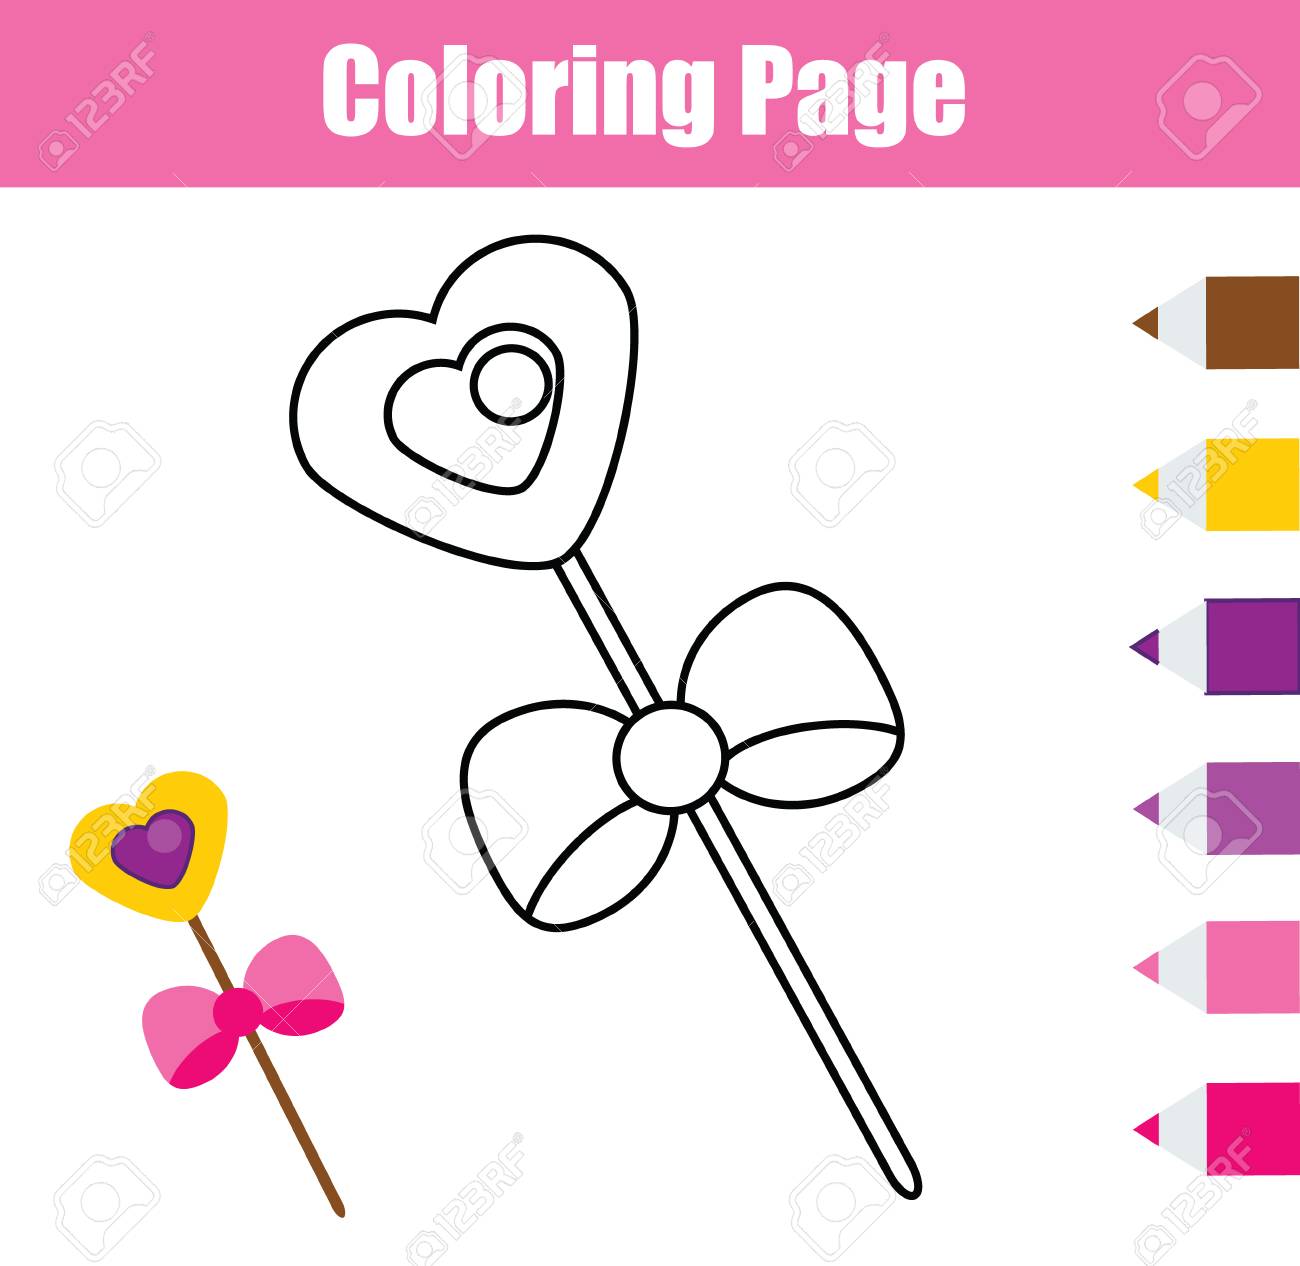 Coloring page with magic wand royalty free svg cliparts vectors and stock illustration image